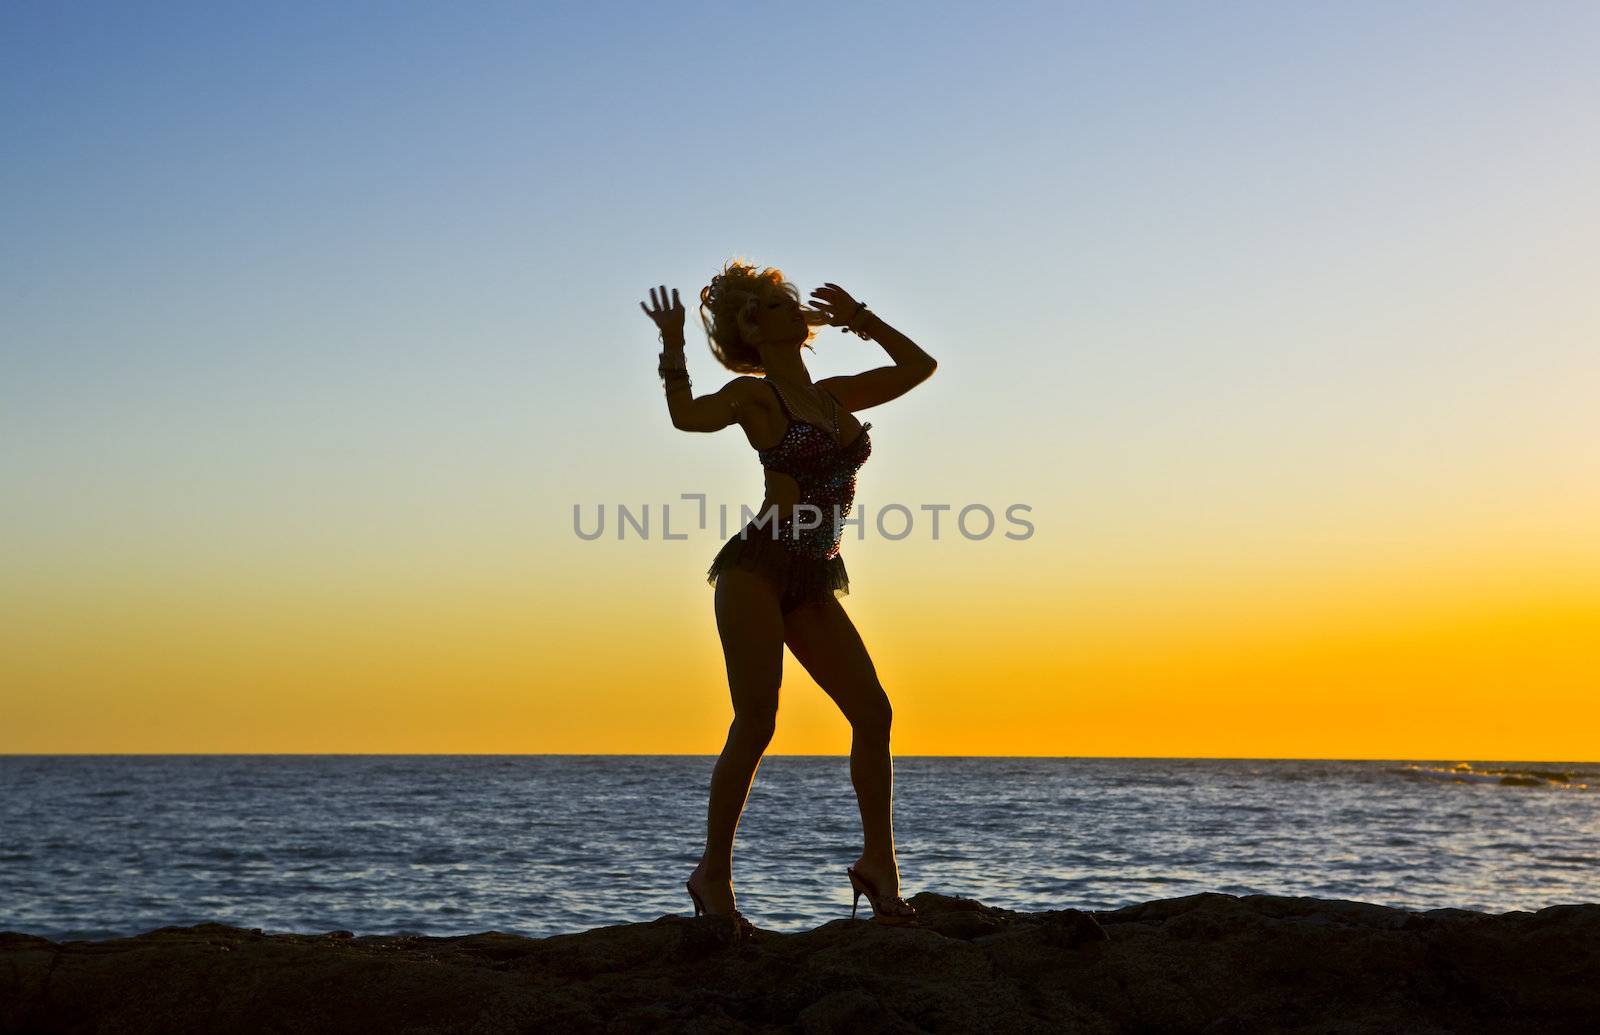 Fantasy Silhouette Dancer on Rocks at the Beach by KevinPanizza